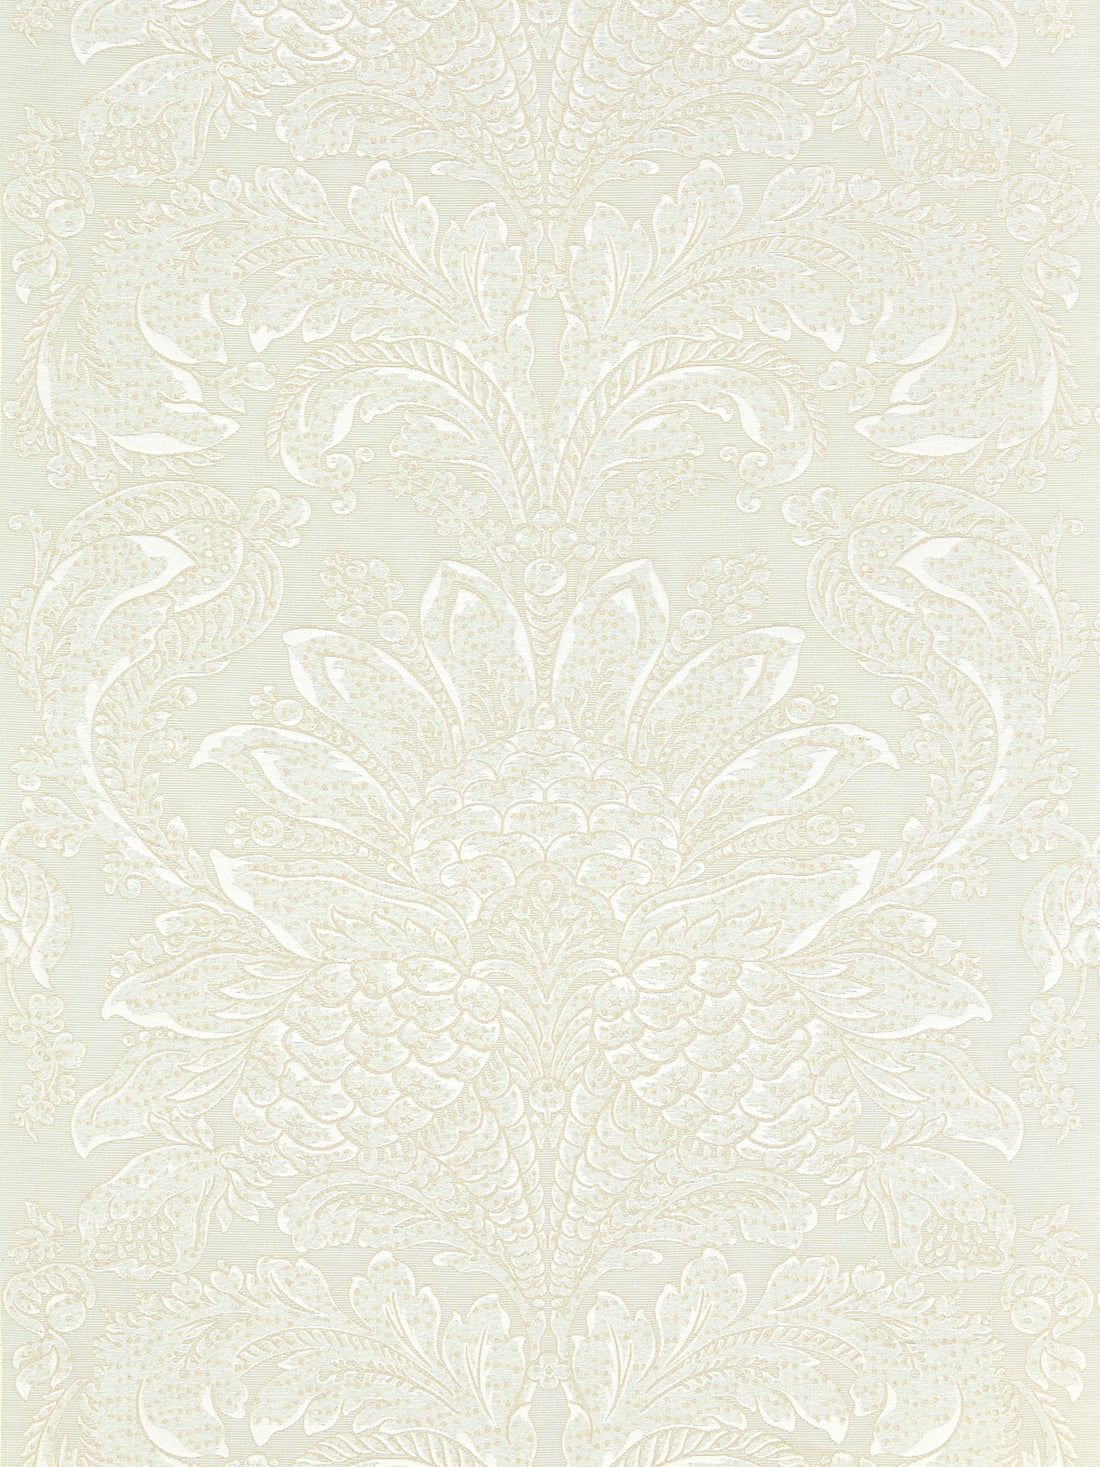 Carlotta Damask fabric in mineral color - pattern number SC 000327081 - by Scalamandre in the Scalamandre Fabrics Book 1 collection